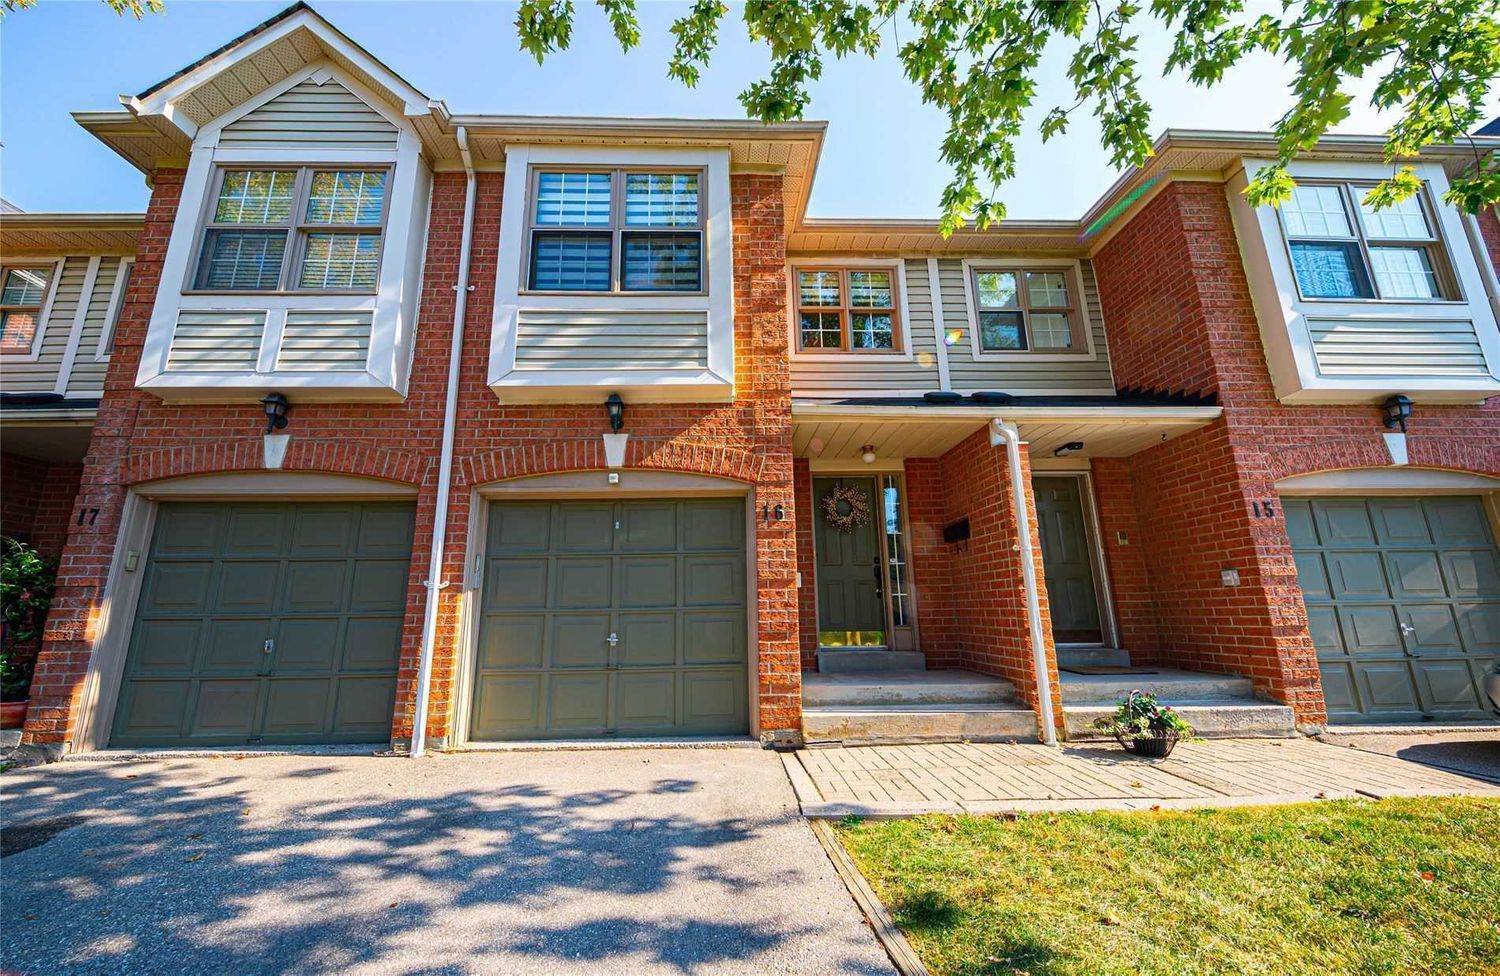 2385 Fifth Line W. Sheridan Woods is located in  Mississauga, Toronto - image #1 of 2